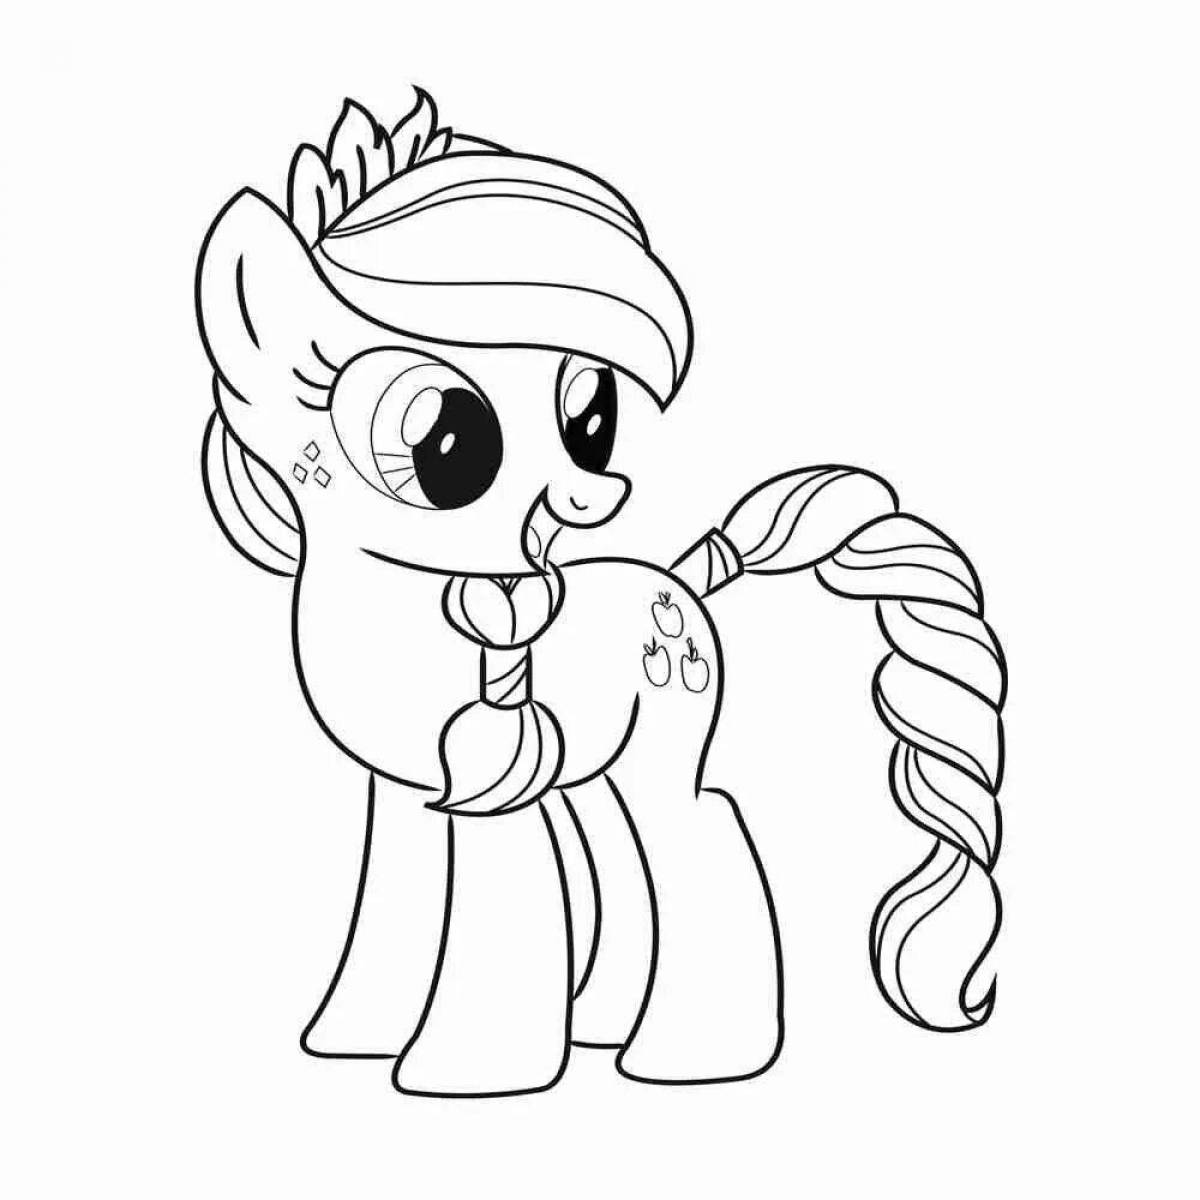 Cute print pony coloring page